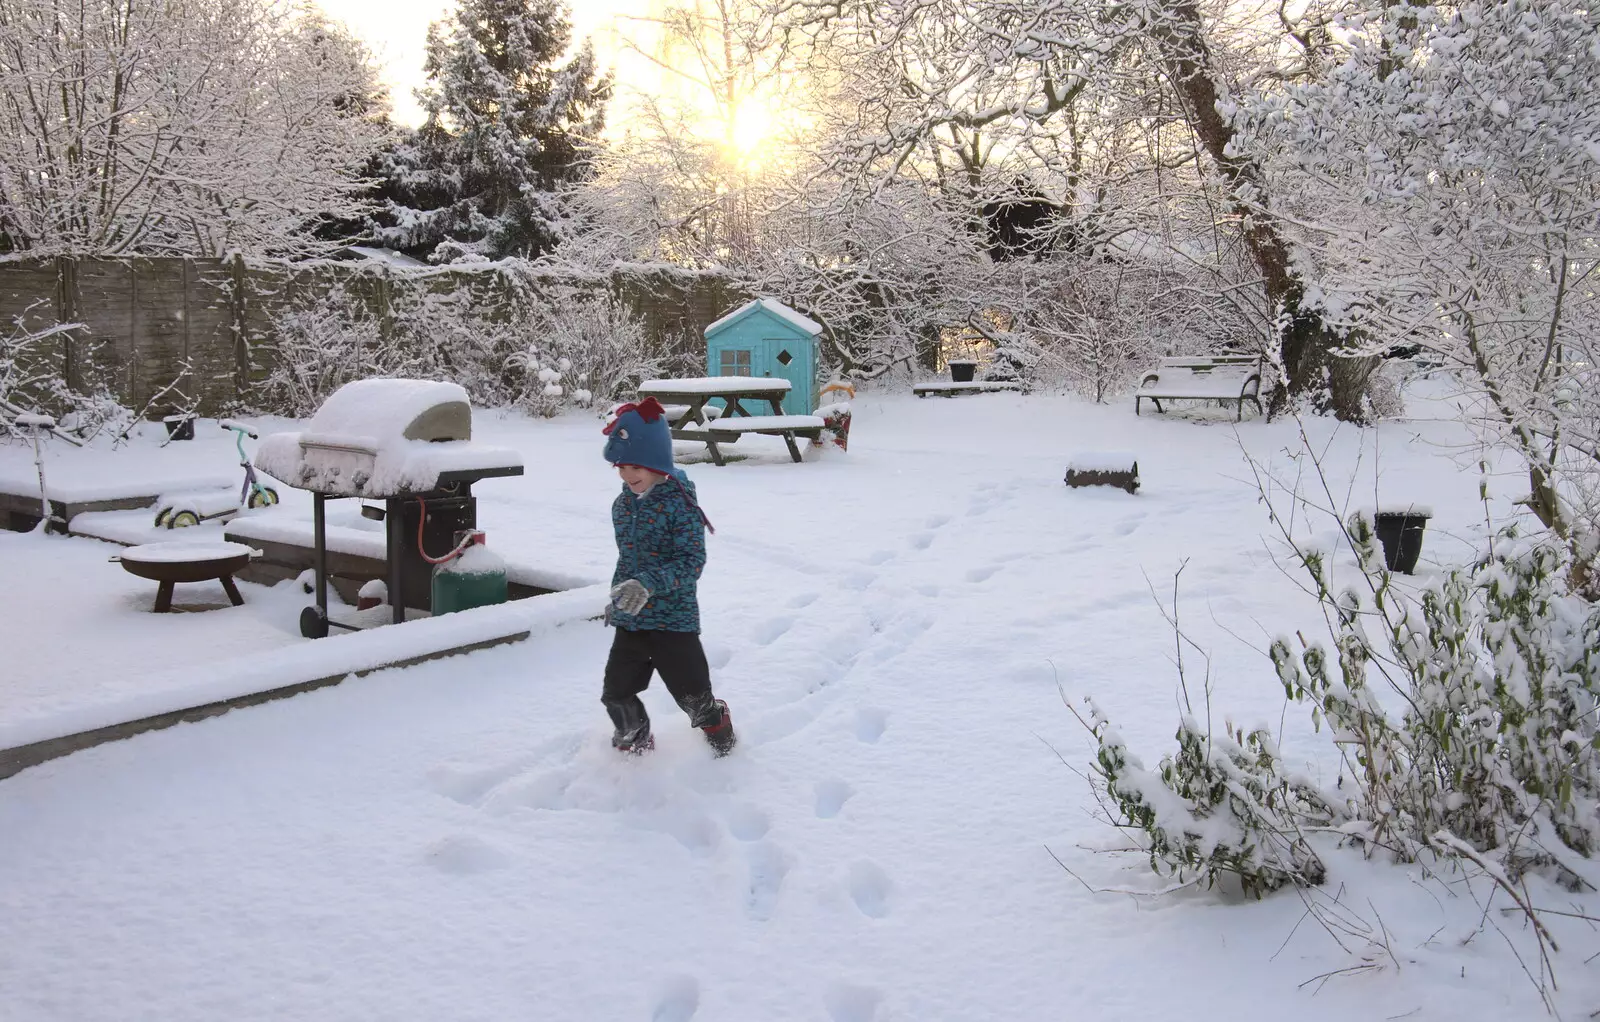 Harry plays in the garden, from Snowmageddon: The Beast From the East, Suffolk and London - 27th February 2018